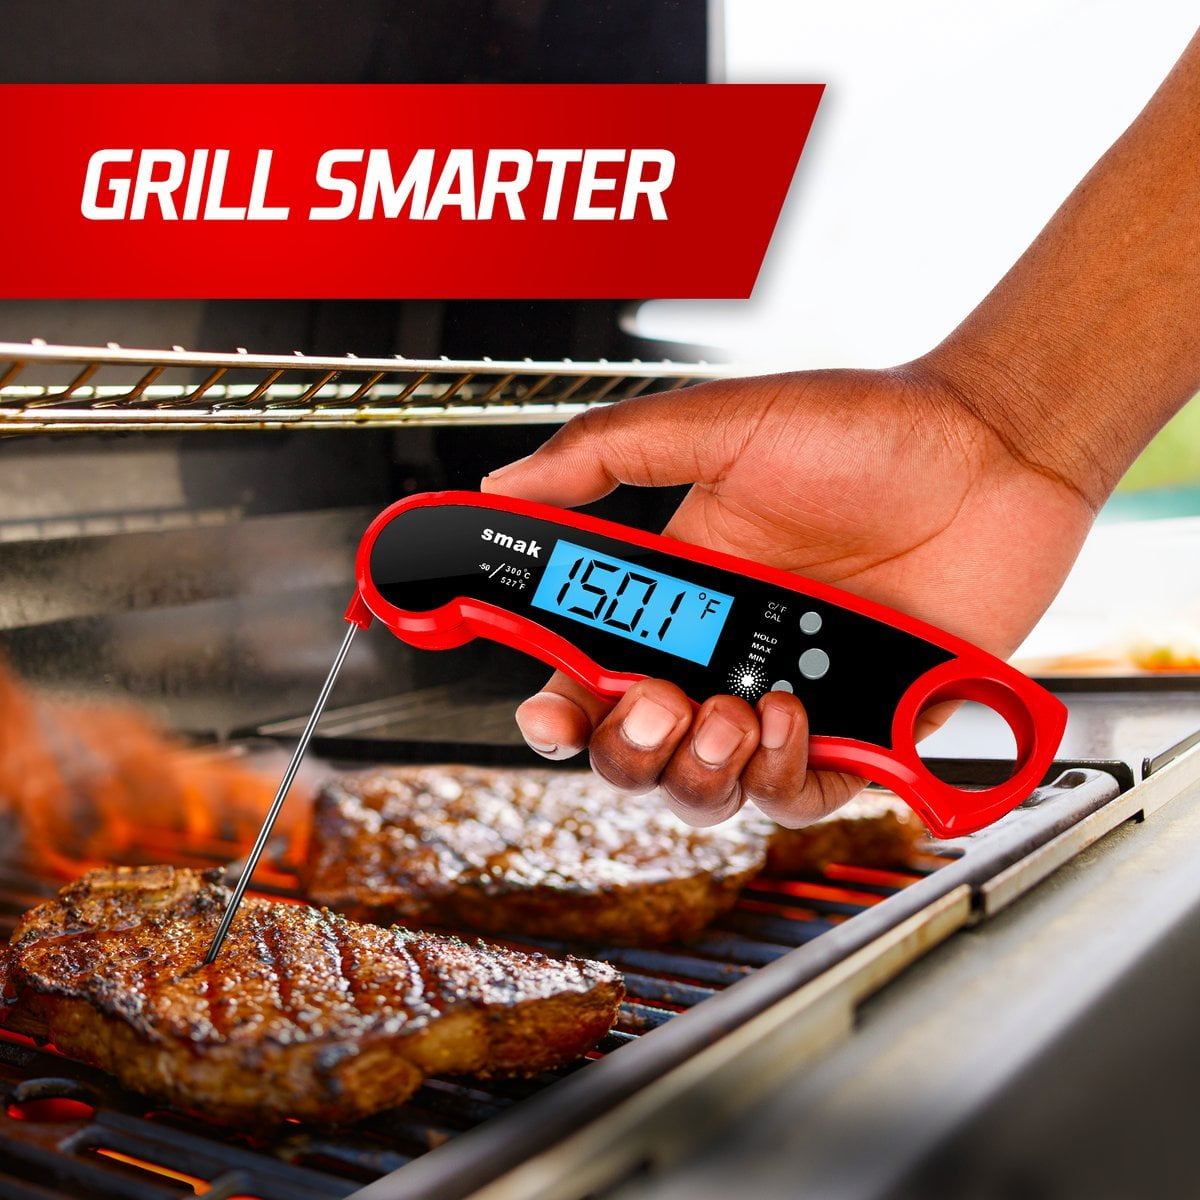 Dropship Grill Instant Read Meat Thermometer For Grilling And Cooking. The  Best Waterproof Ultra Fast Thermometer With Backlight And Calibration.  Digital Food Probe For Kitchens, Outdoor Grills And BBQs! to Sell Online